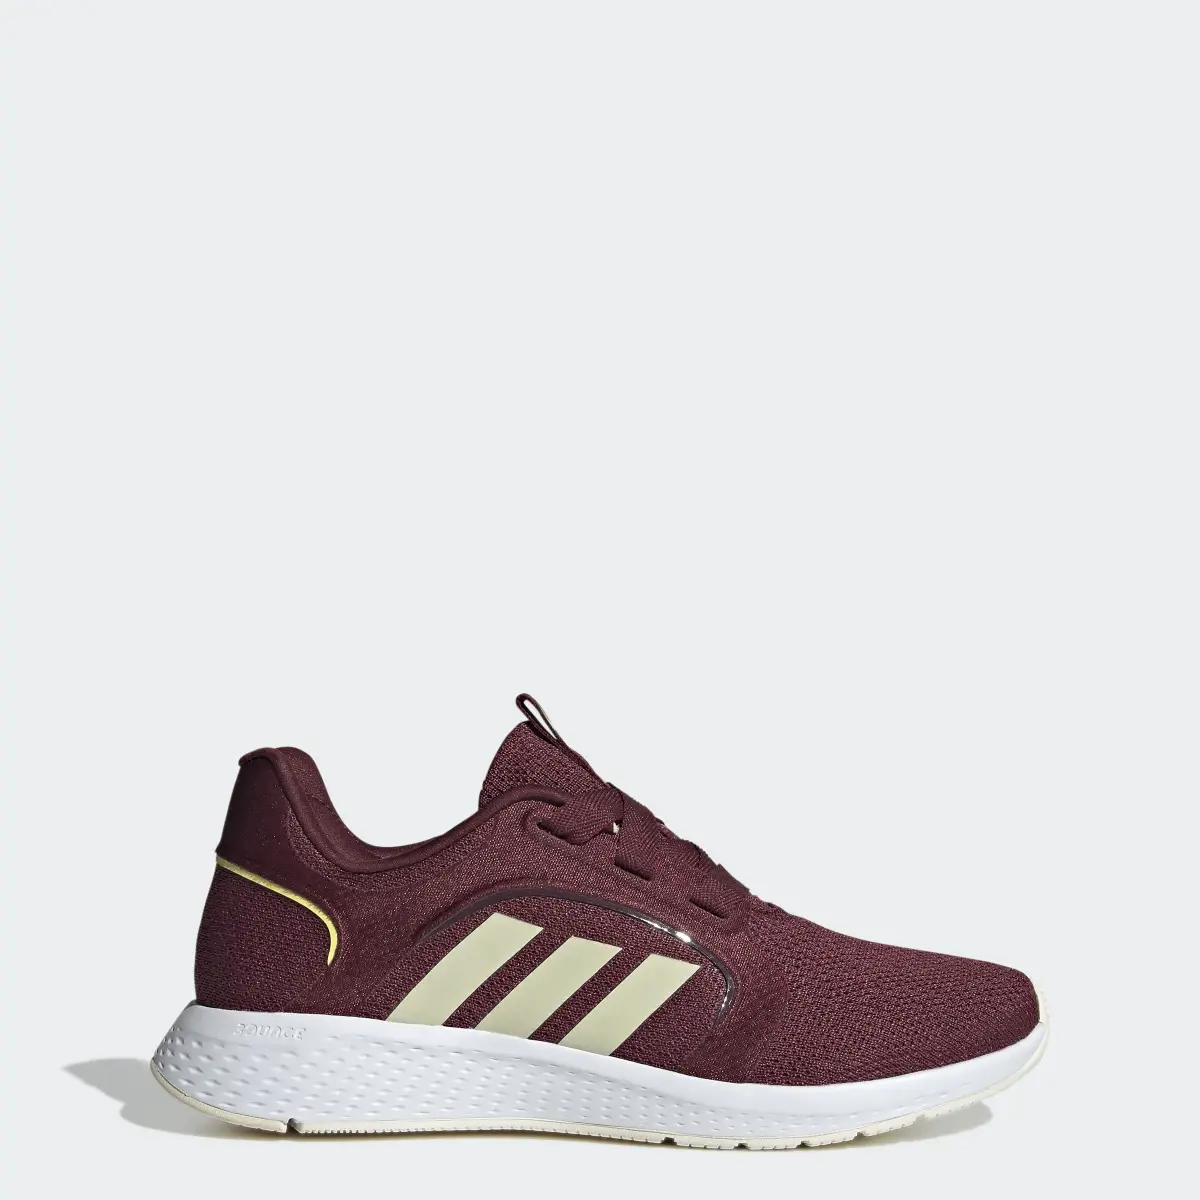 Adidas Edge Lux Shoes. 1